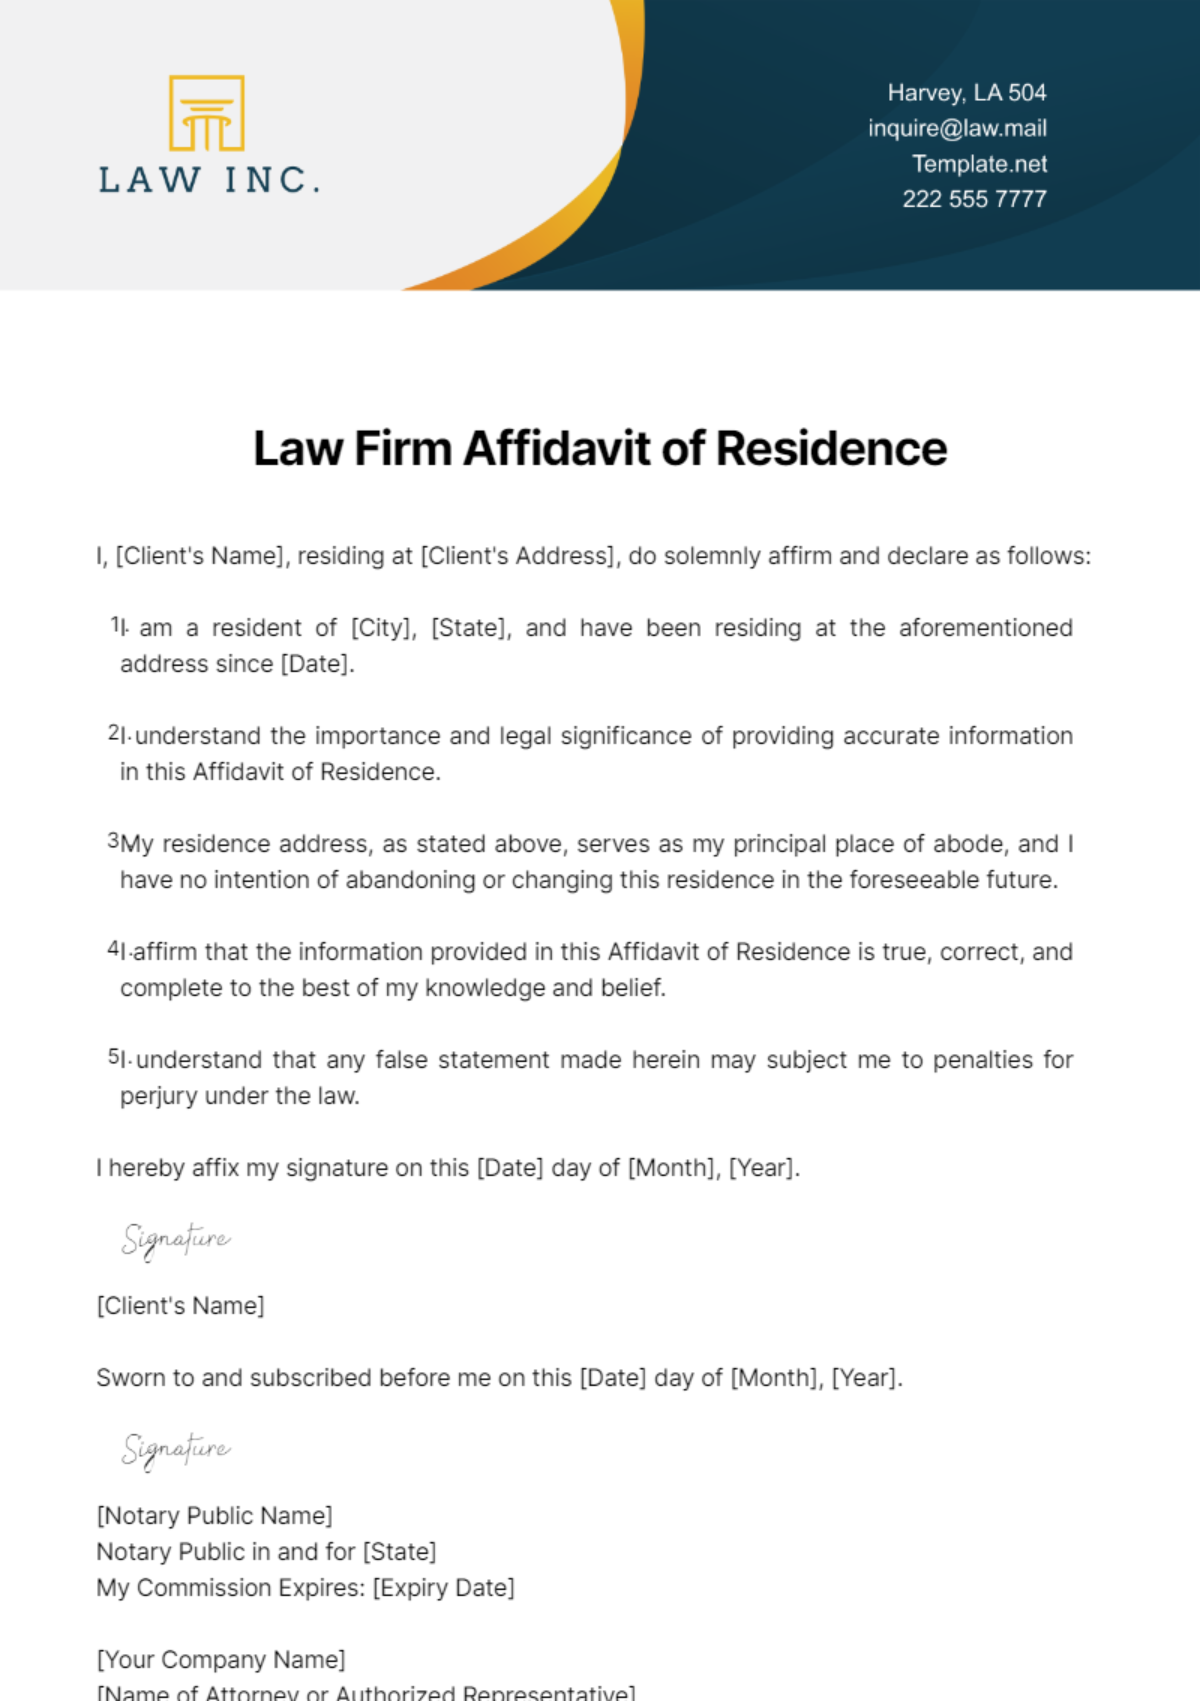 Law Firm Affidavit of Residence Template